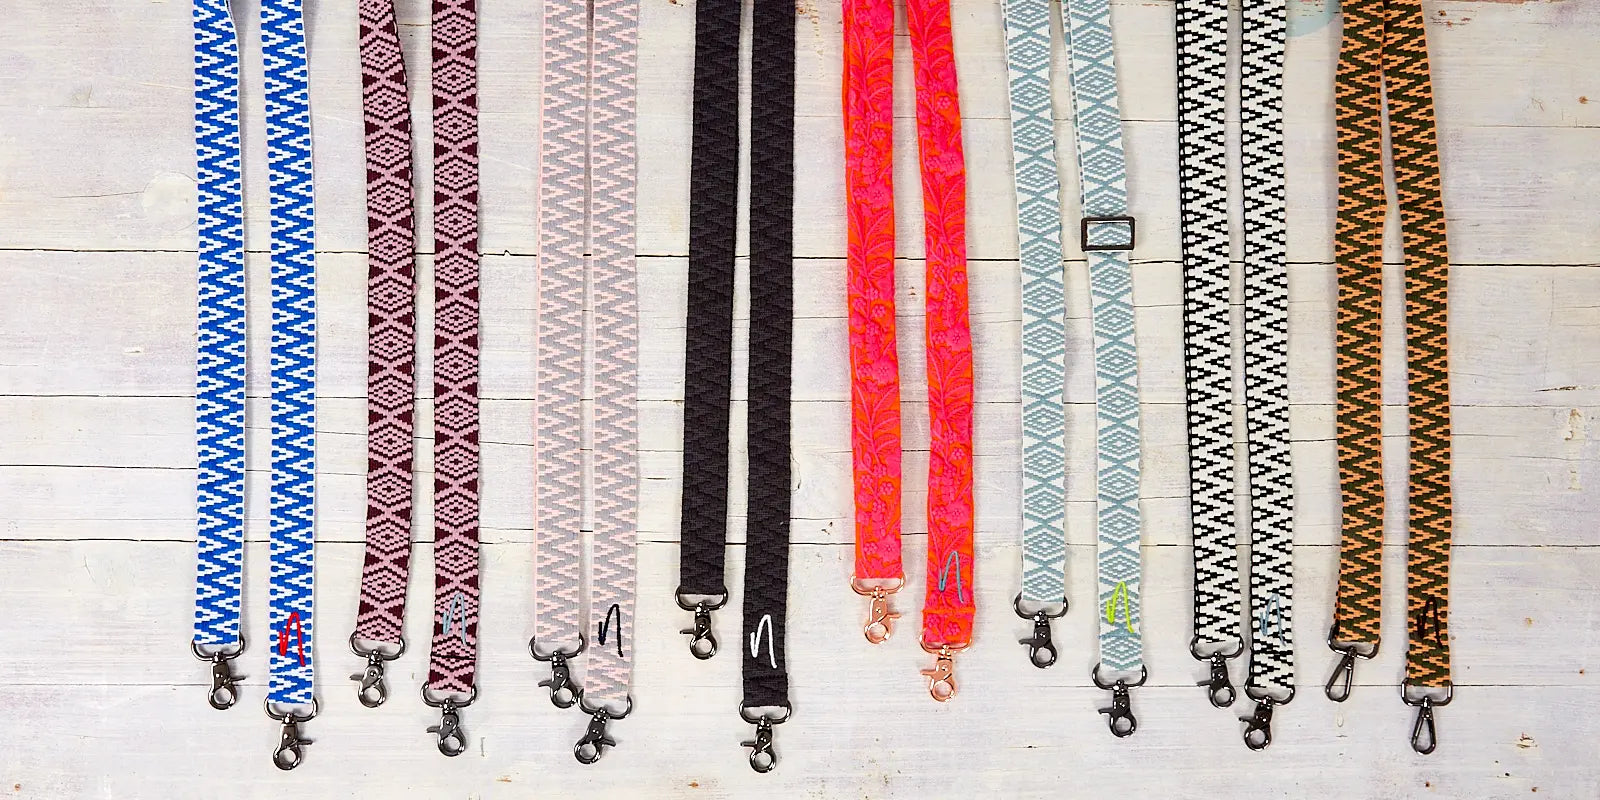 Wide woven phone strap - Sweet Grey LIMITED EDITION